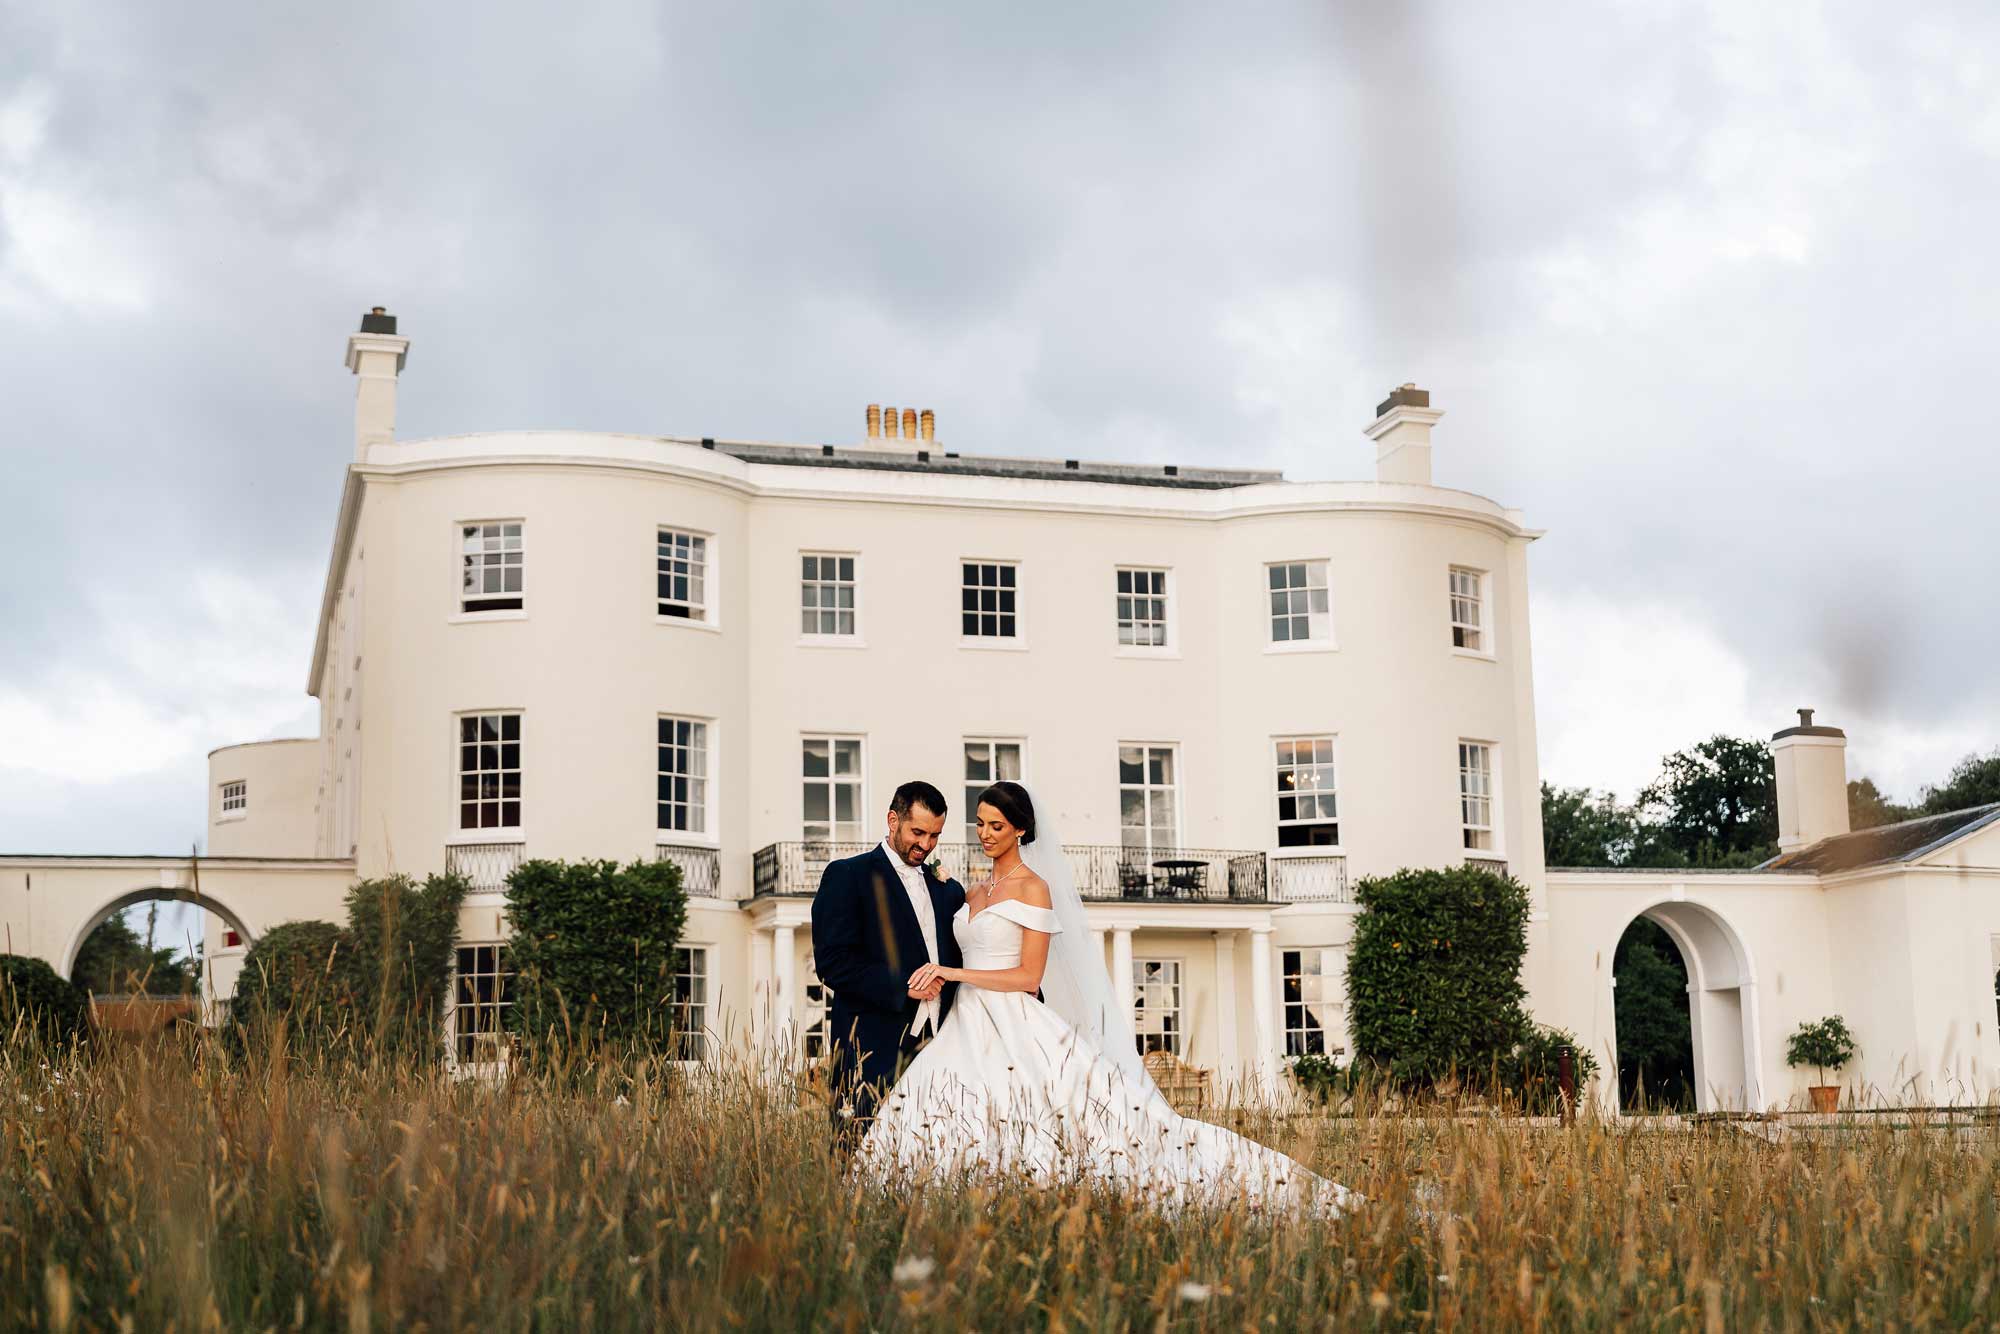 Bride and Groom standing in front of rockbeare manor having a lovely embraced moment